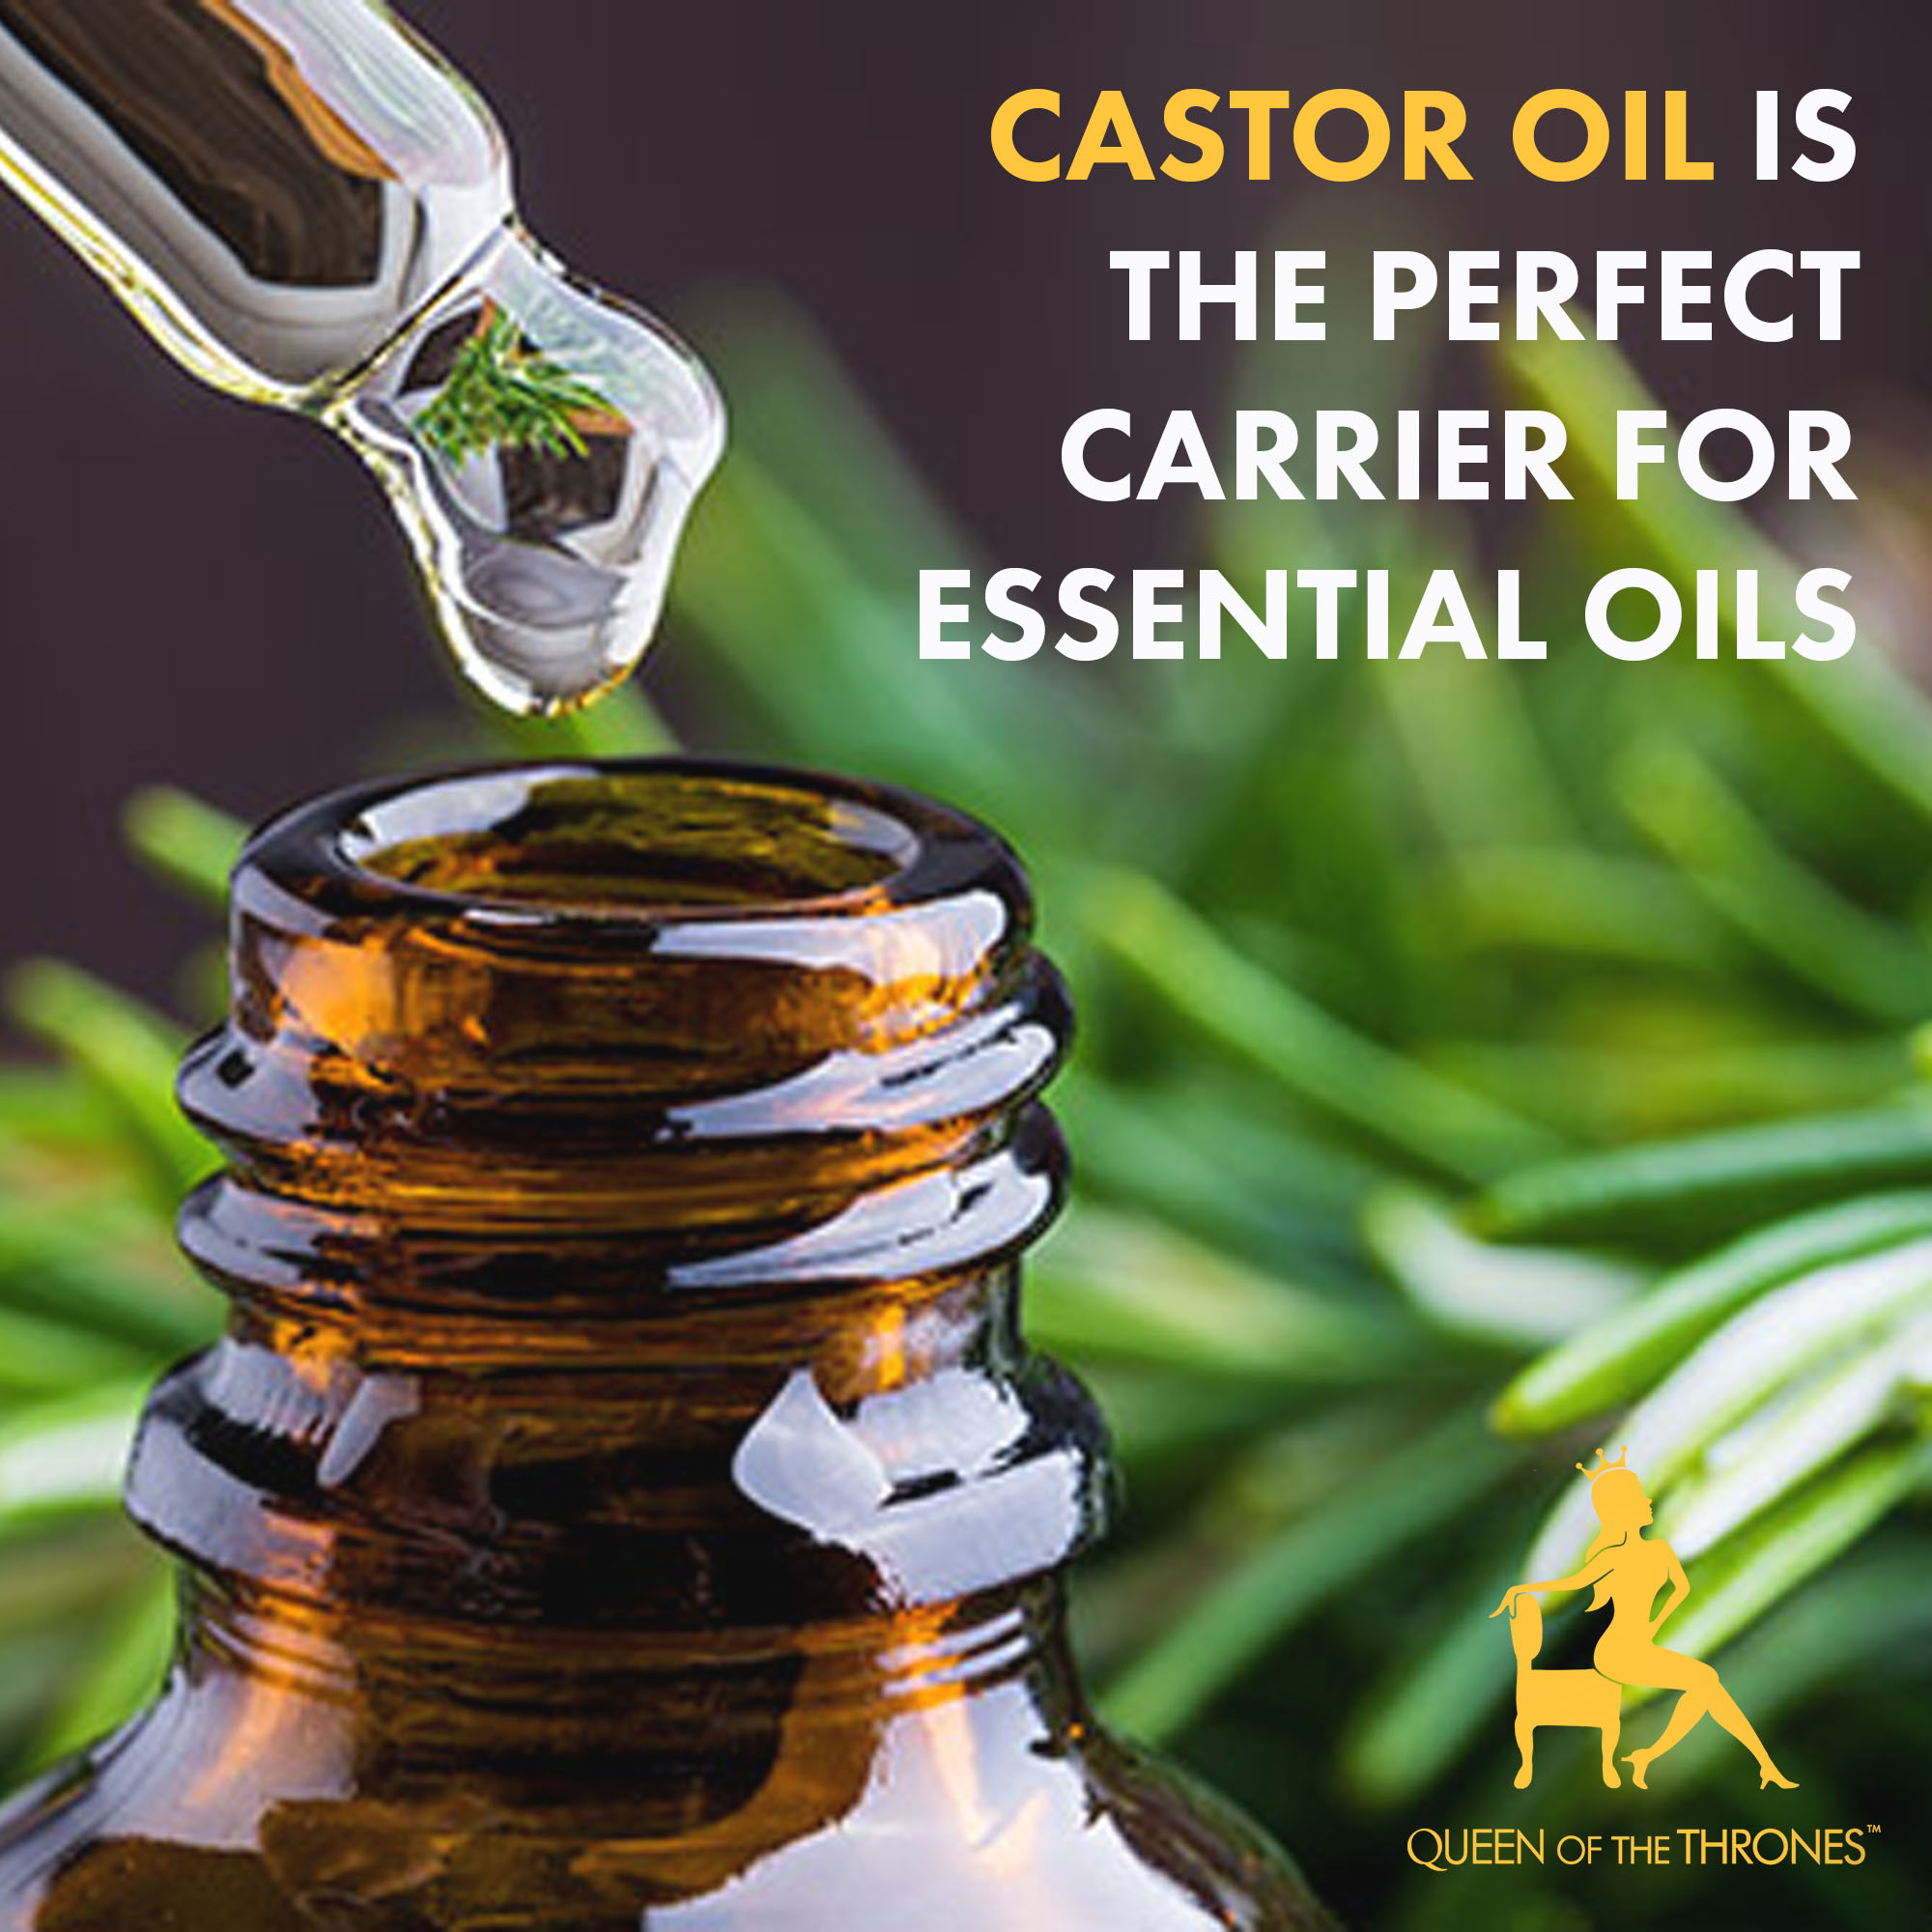 Queen of the Thrones Castor Oil is a carrier of Essential Oils